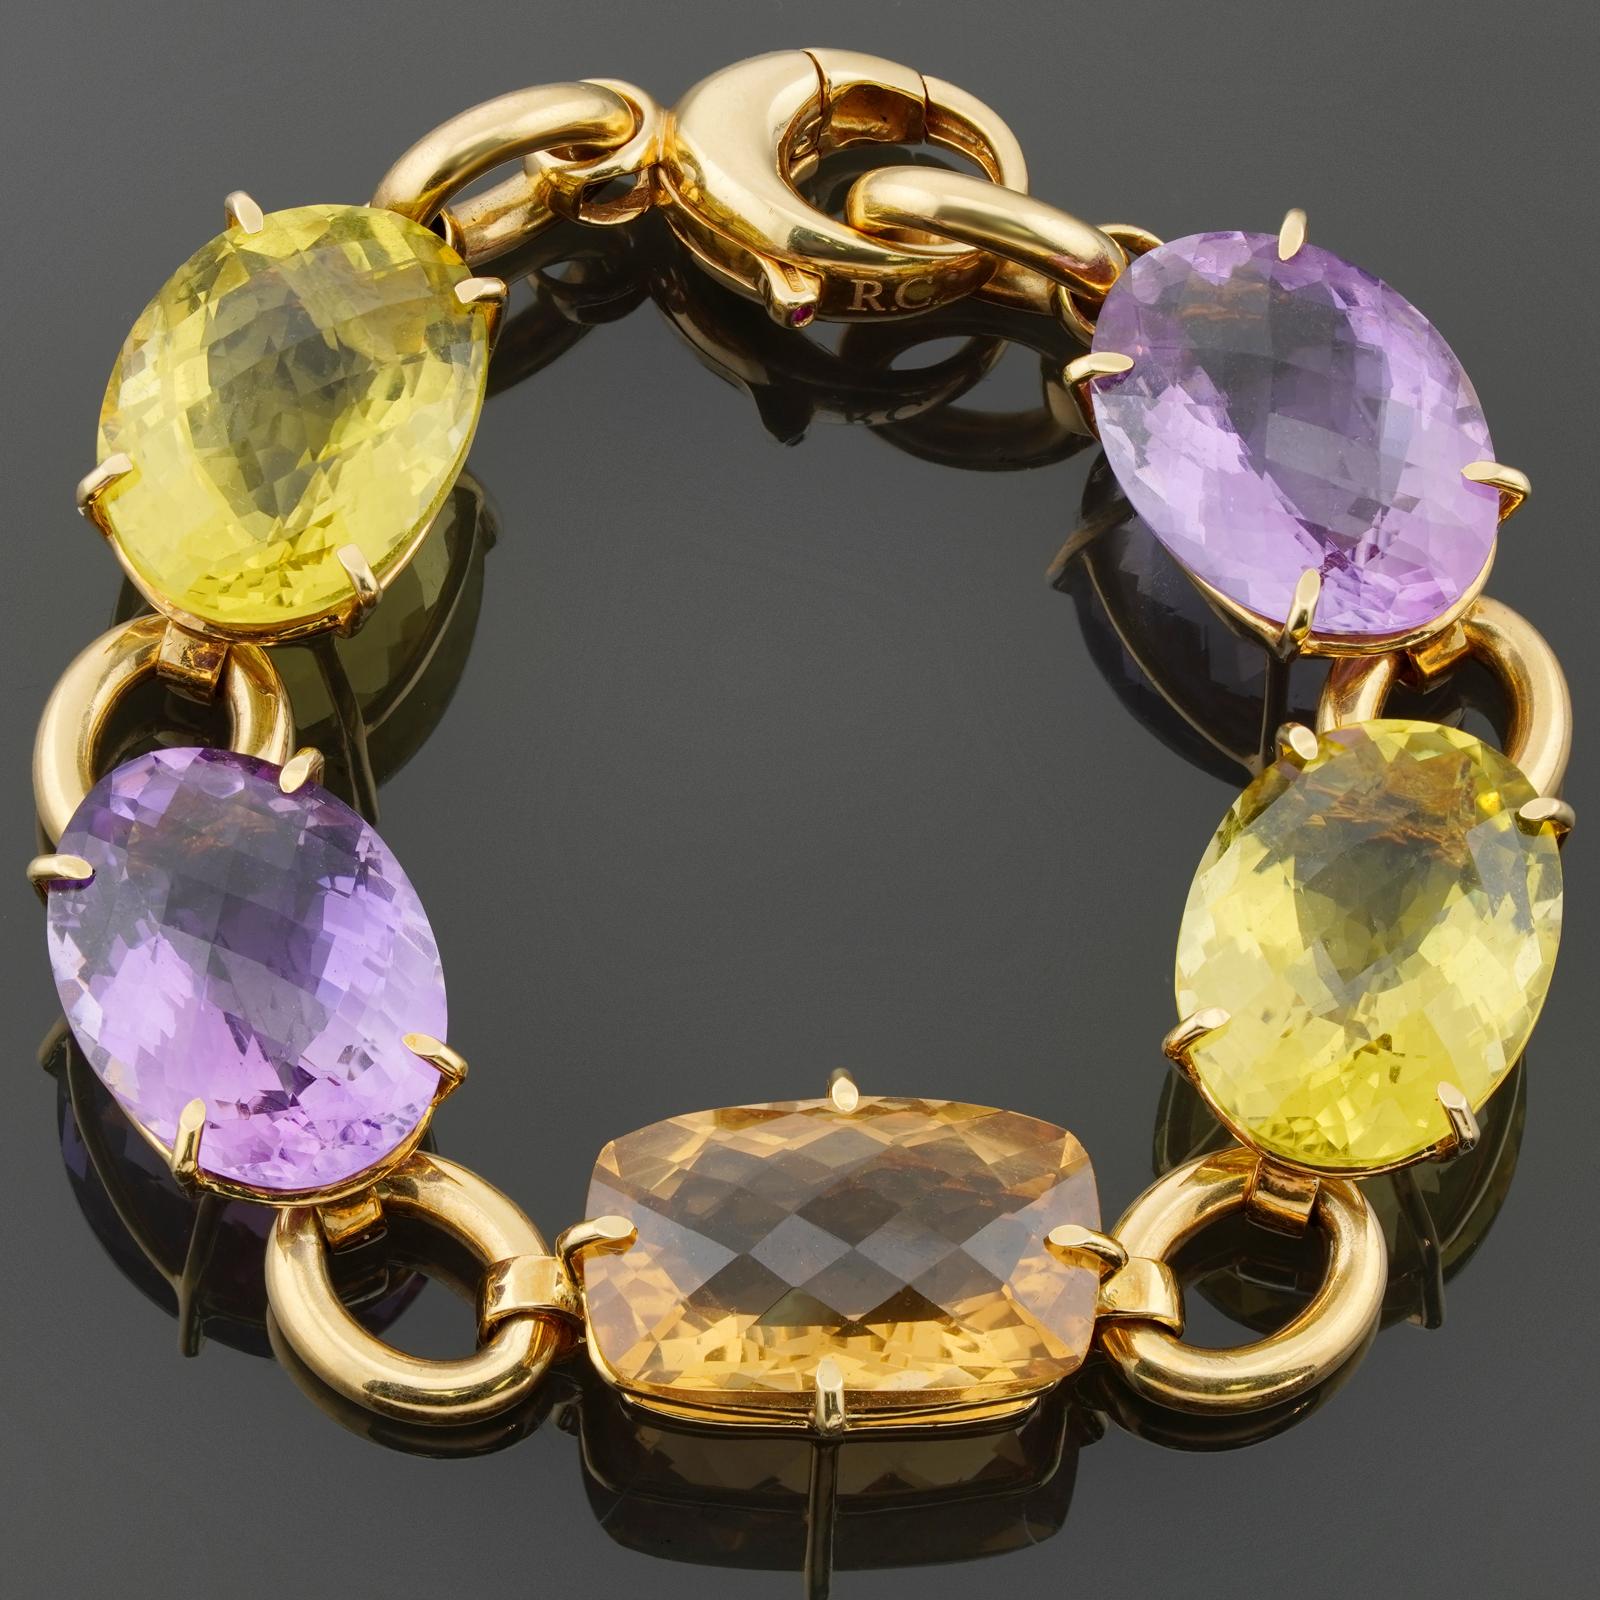 ROBERTO COIN 18k Yellow Gold Multicolor Gemstone Bracelet In Excellent Condition For Sale In New York, NY